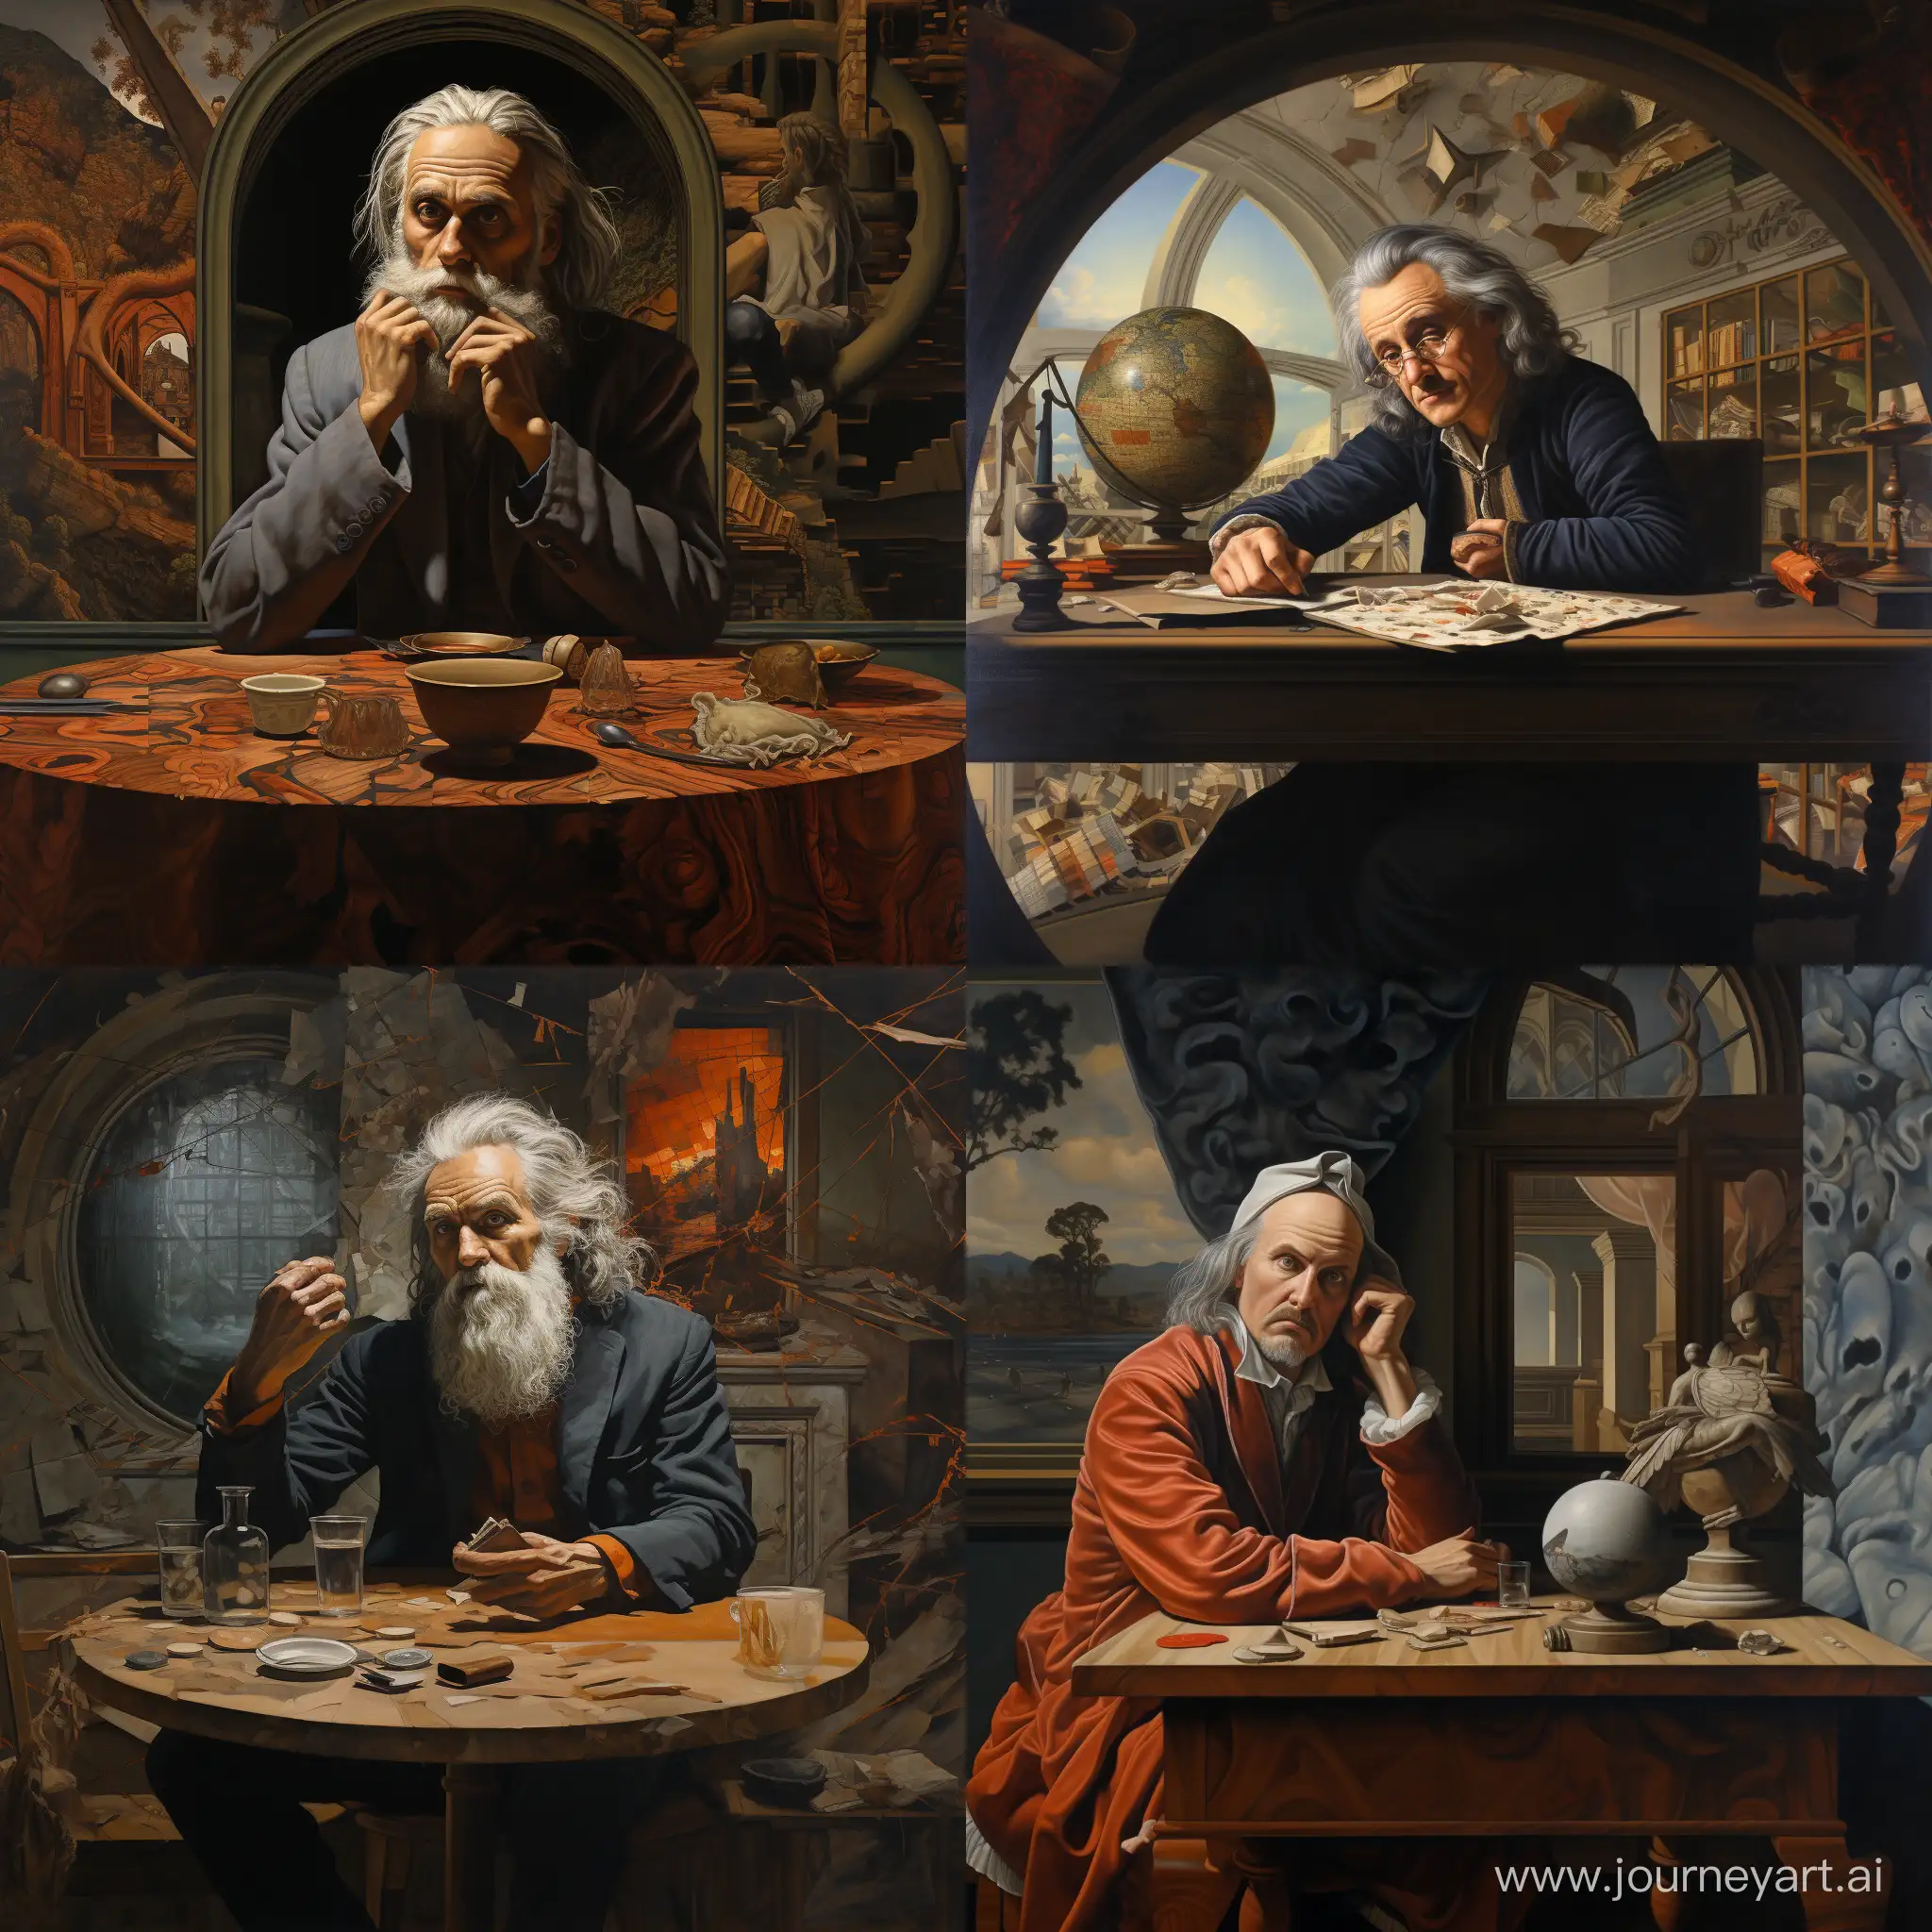 Contemplative-Philosopher-Sitting-at-Table-in-HalfTurn